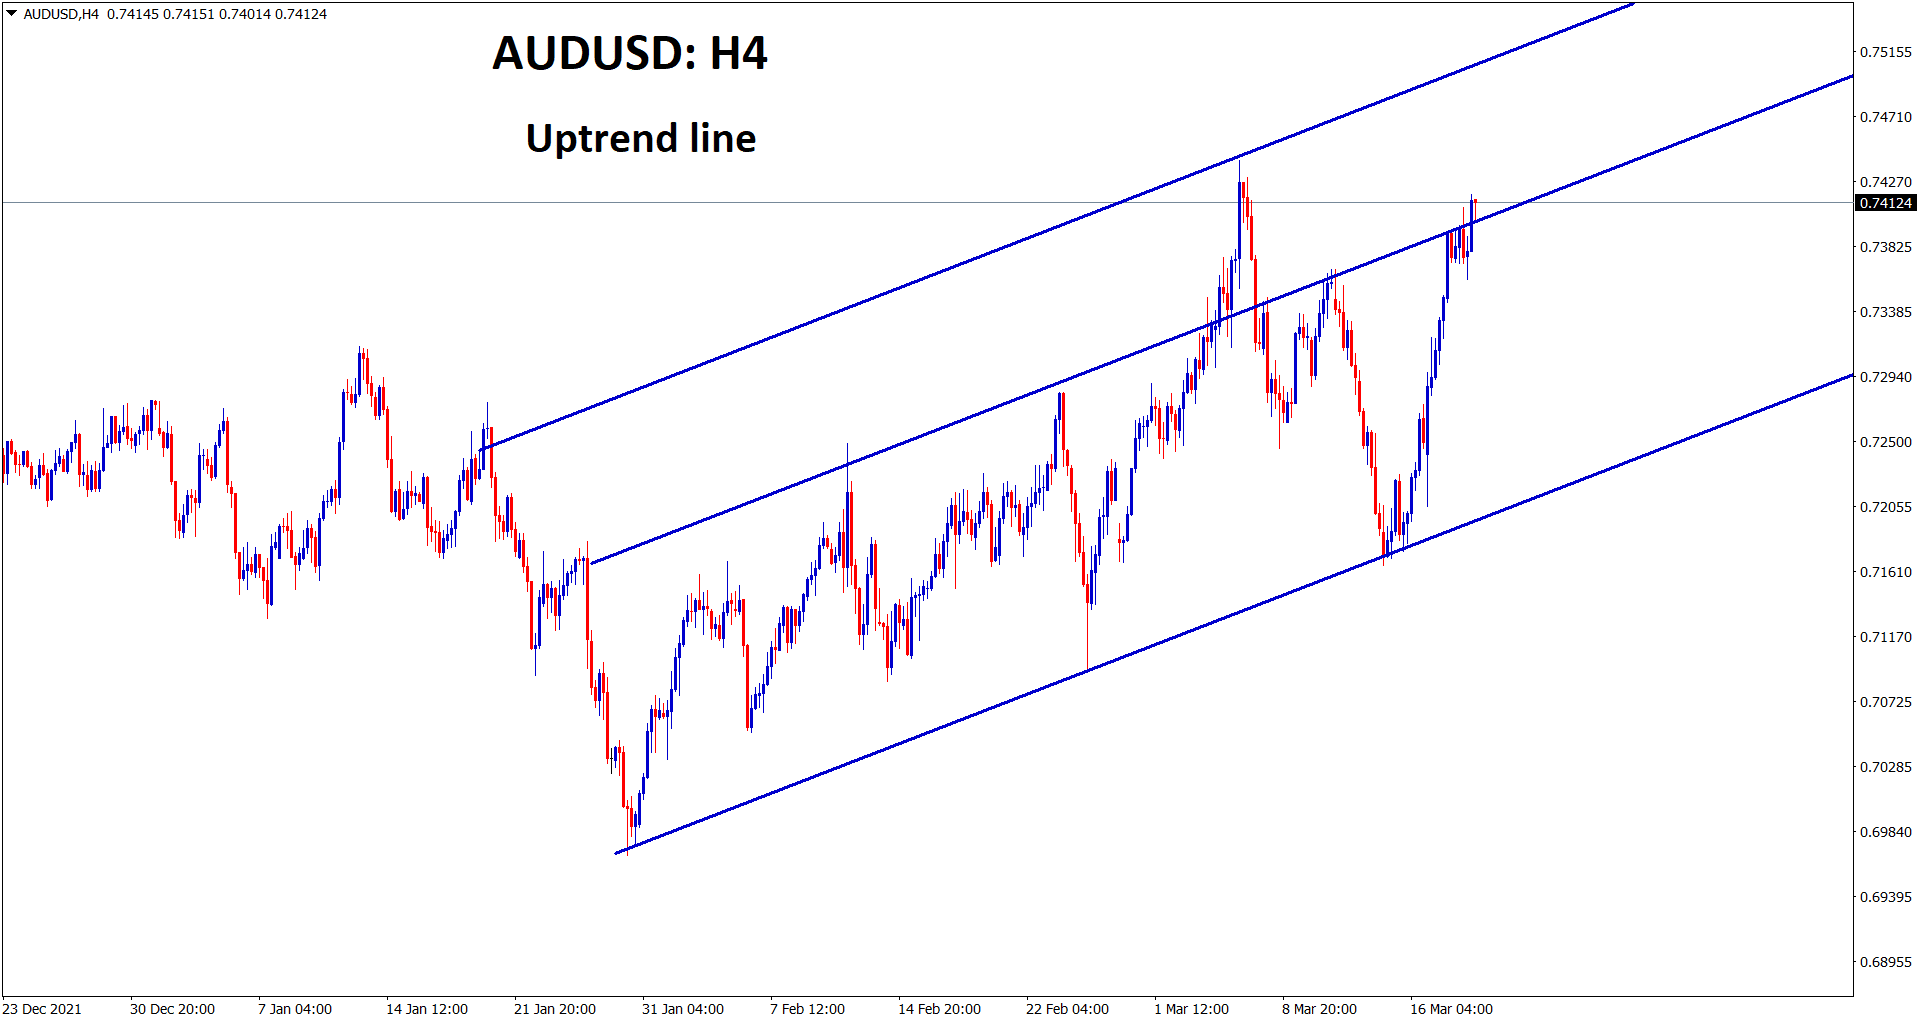 AUDUSD is moving in an uptrend